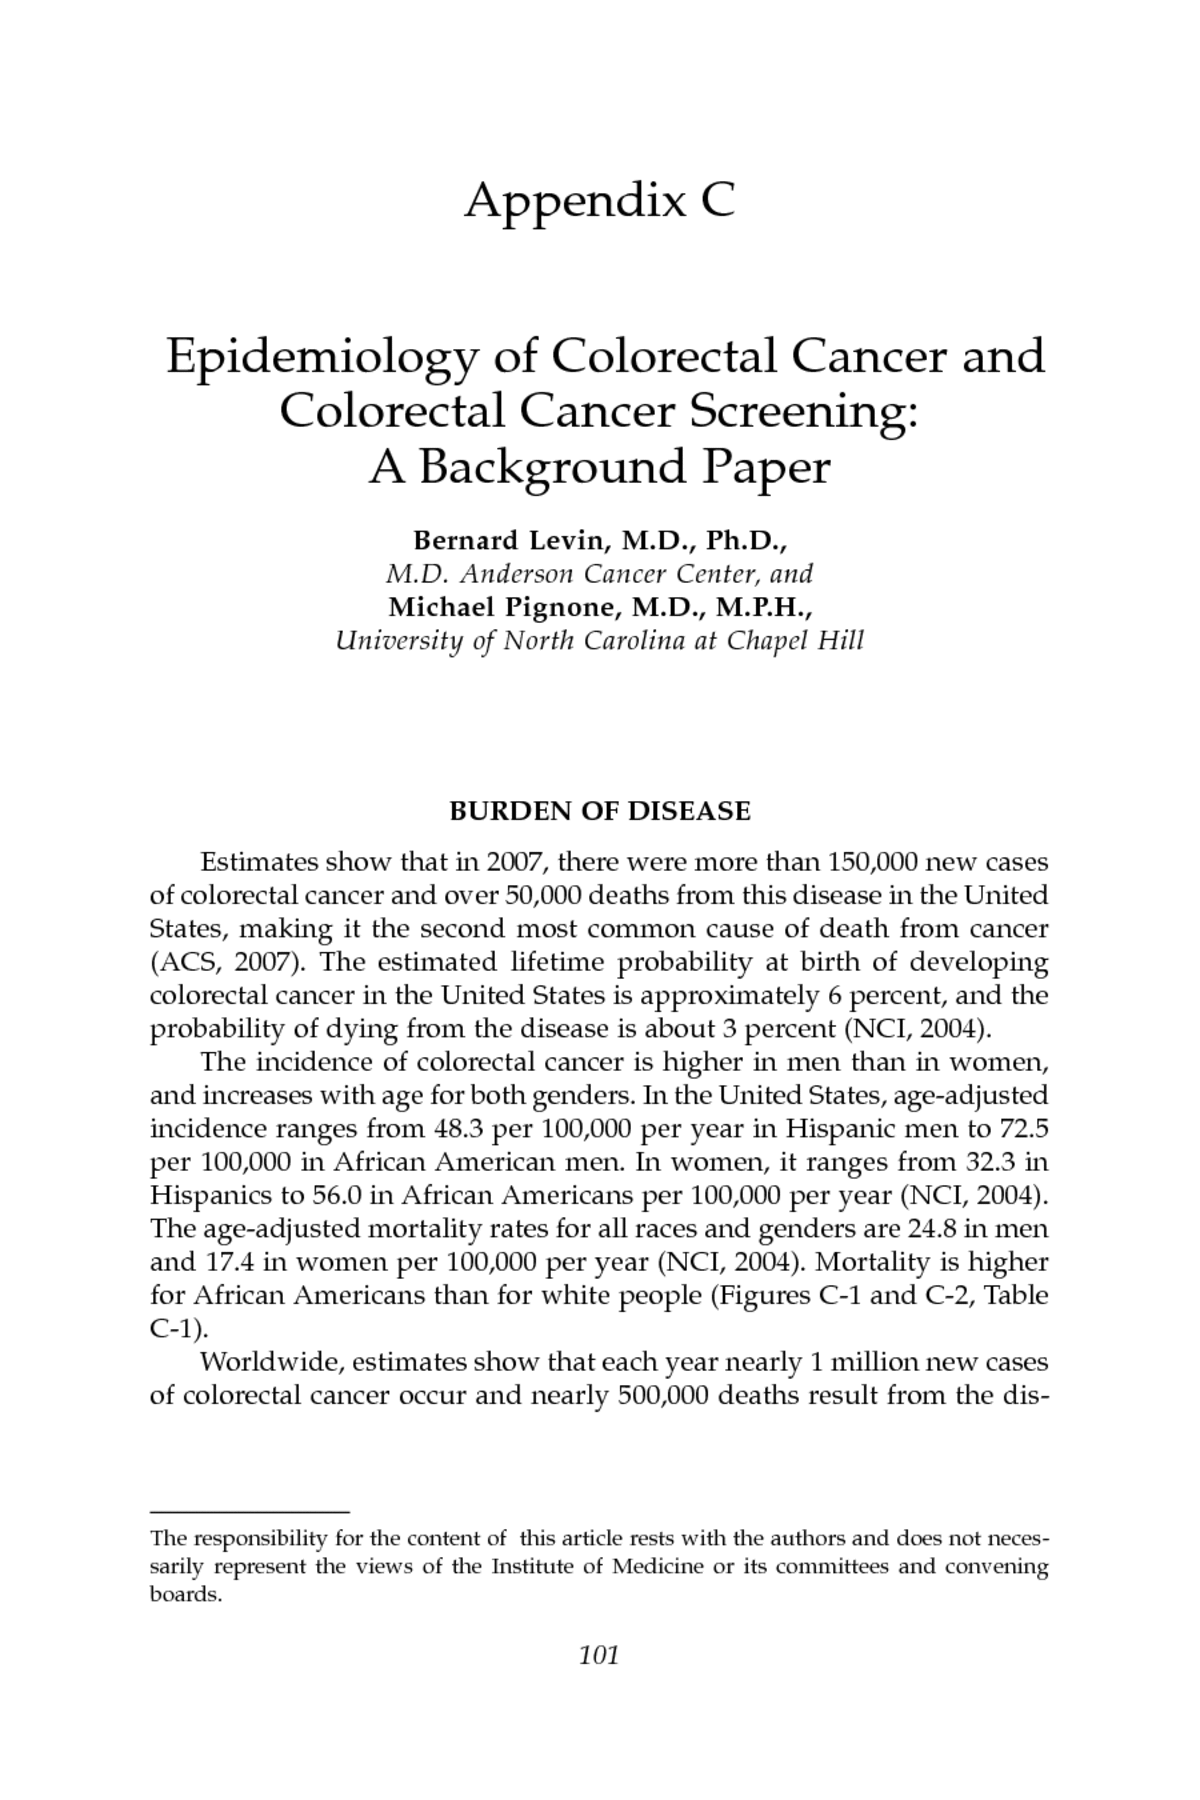 Appendix C Epidemiology Of Colorectal Cancer And